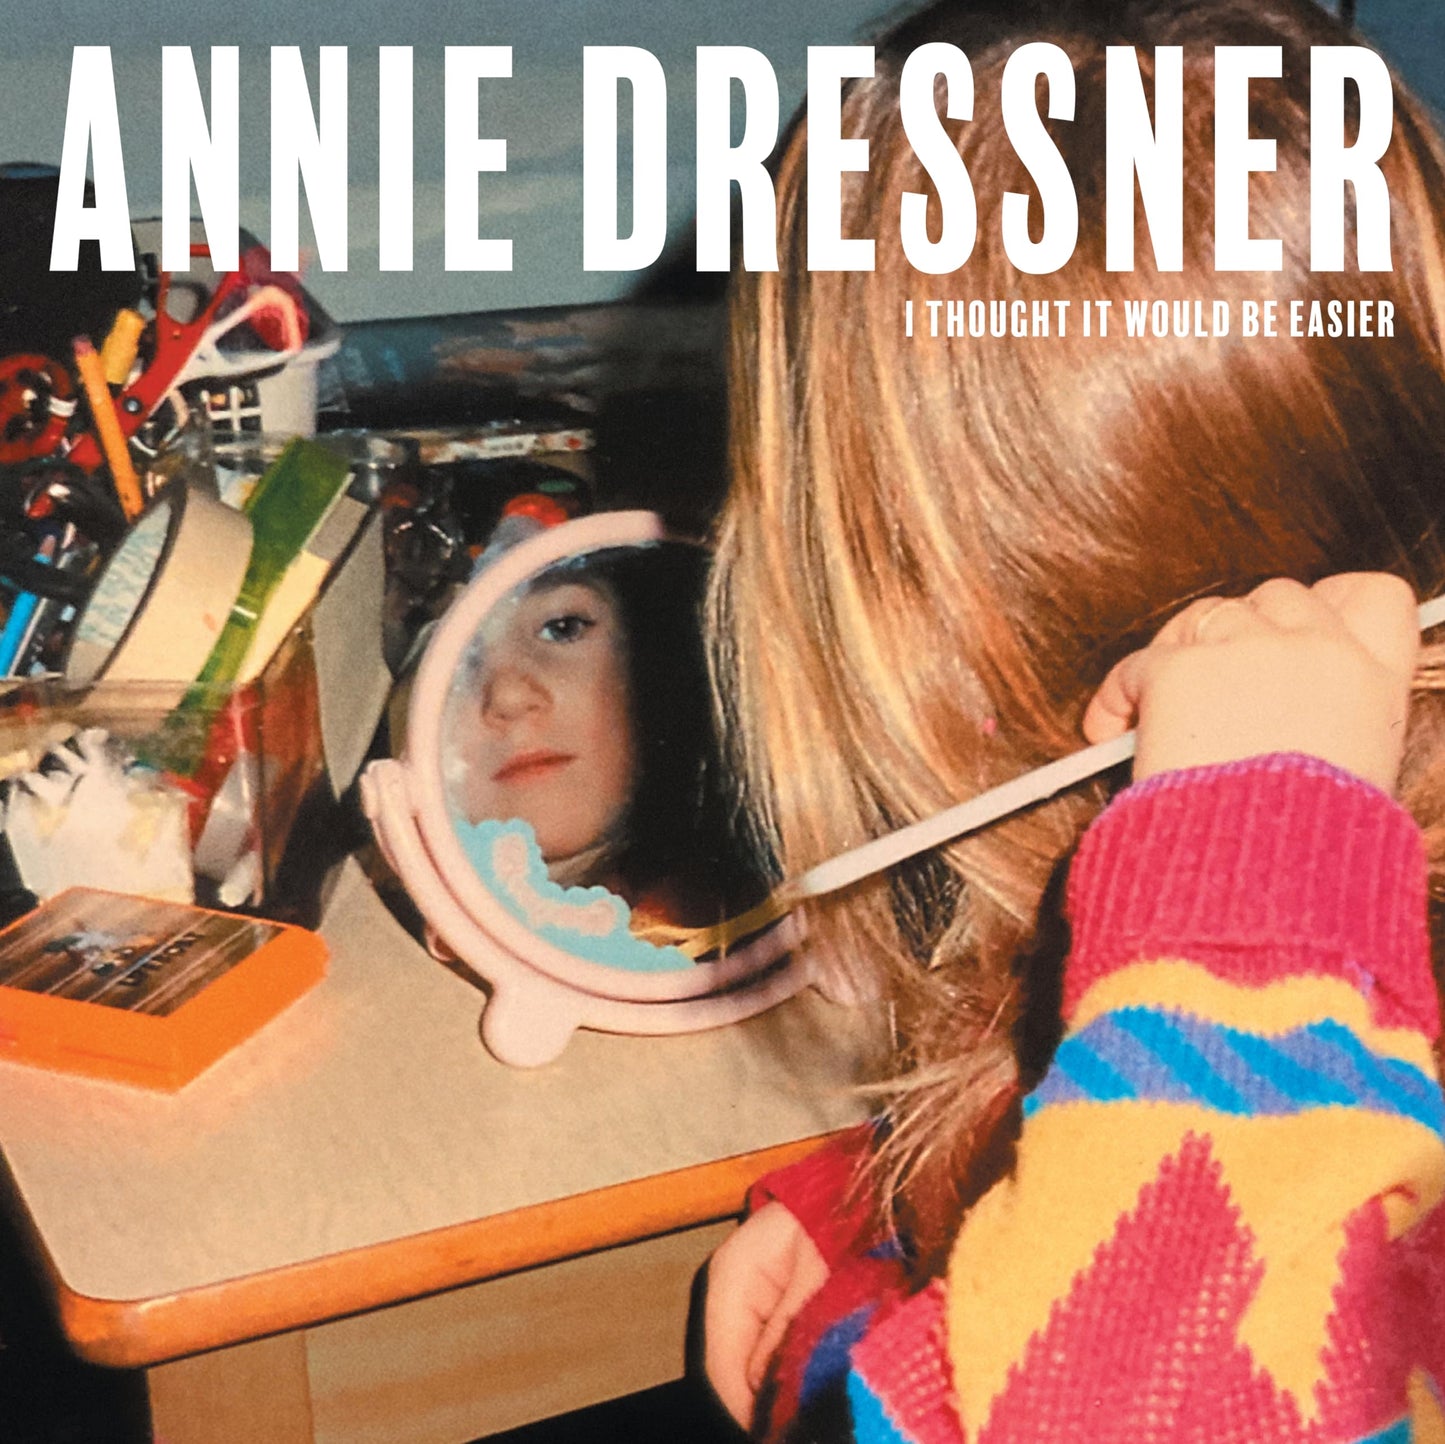 Annie Dressner - I Thought It Would Be Easier - Import CD